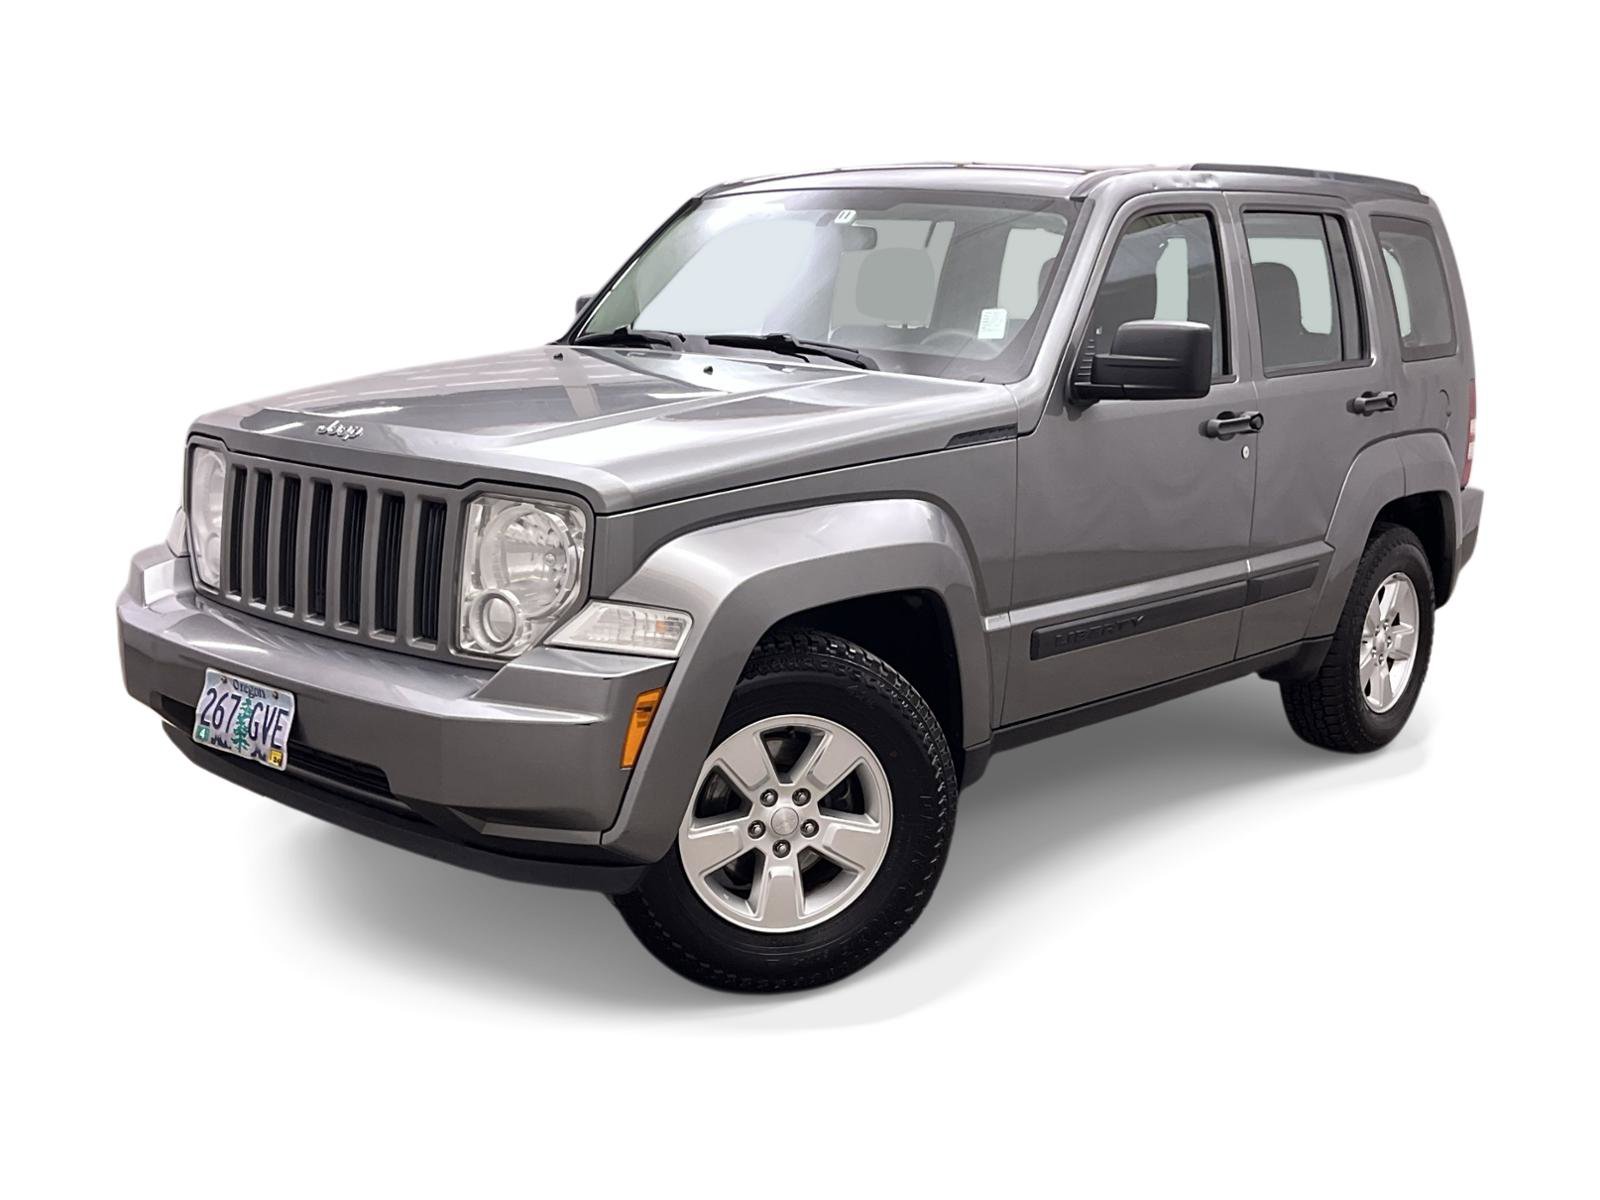 Used Jeep Liberty for Sale Near Me in Salem, OR - Autotrader